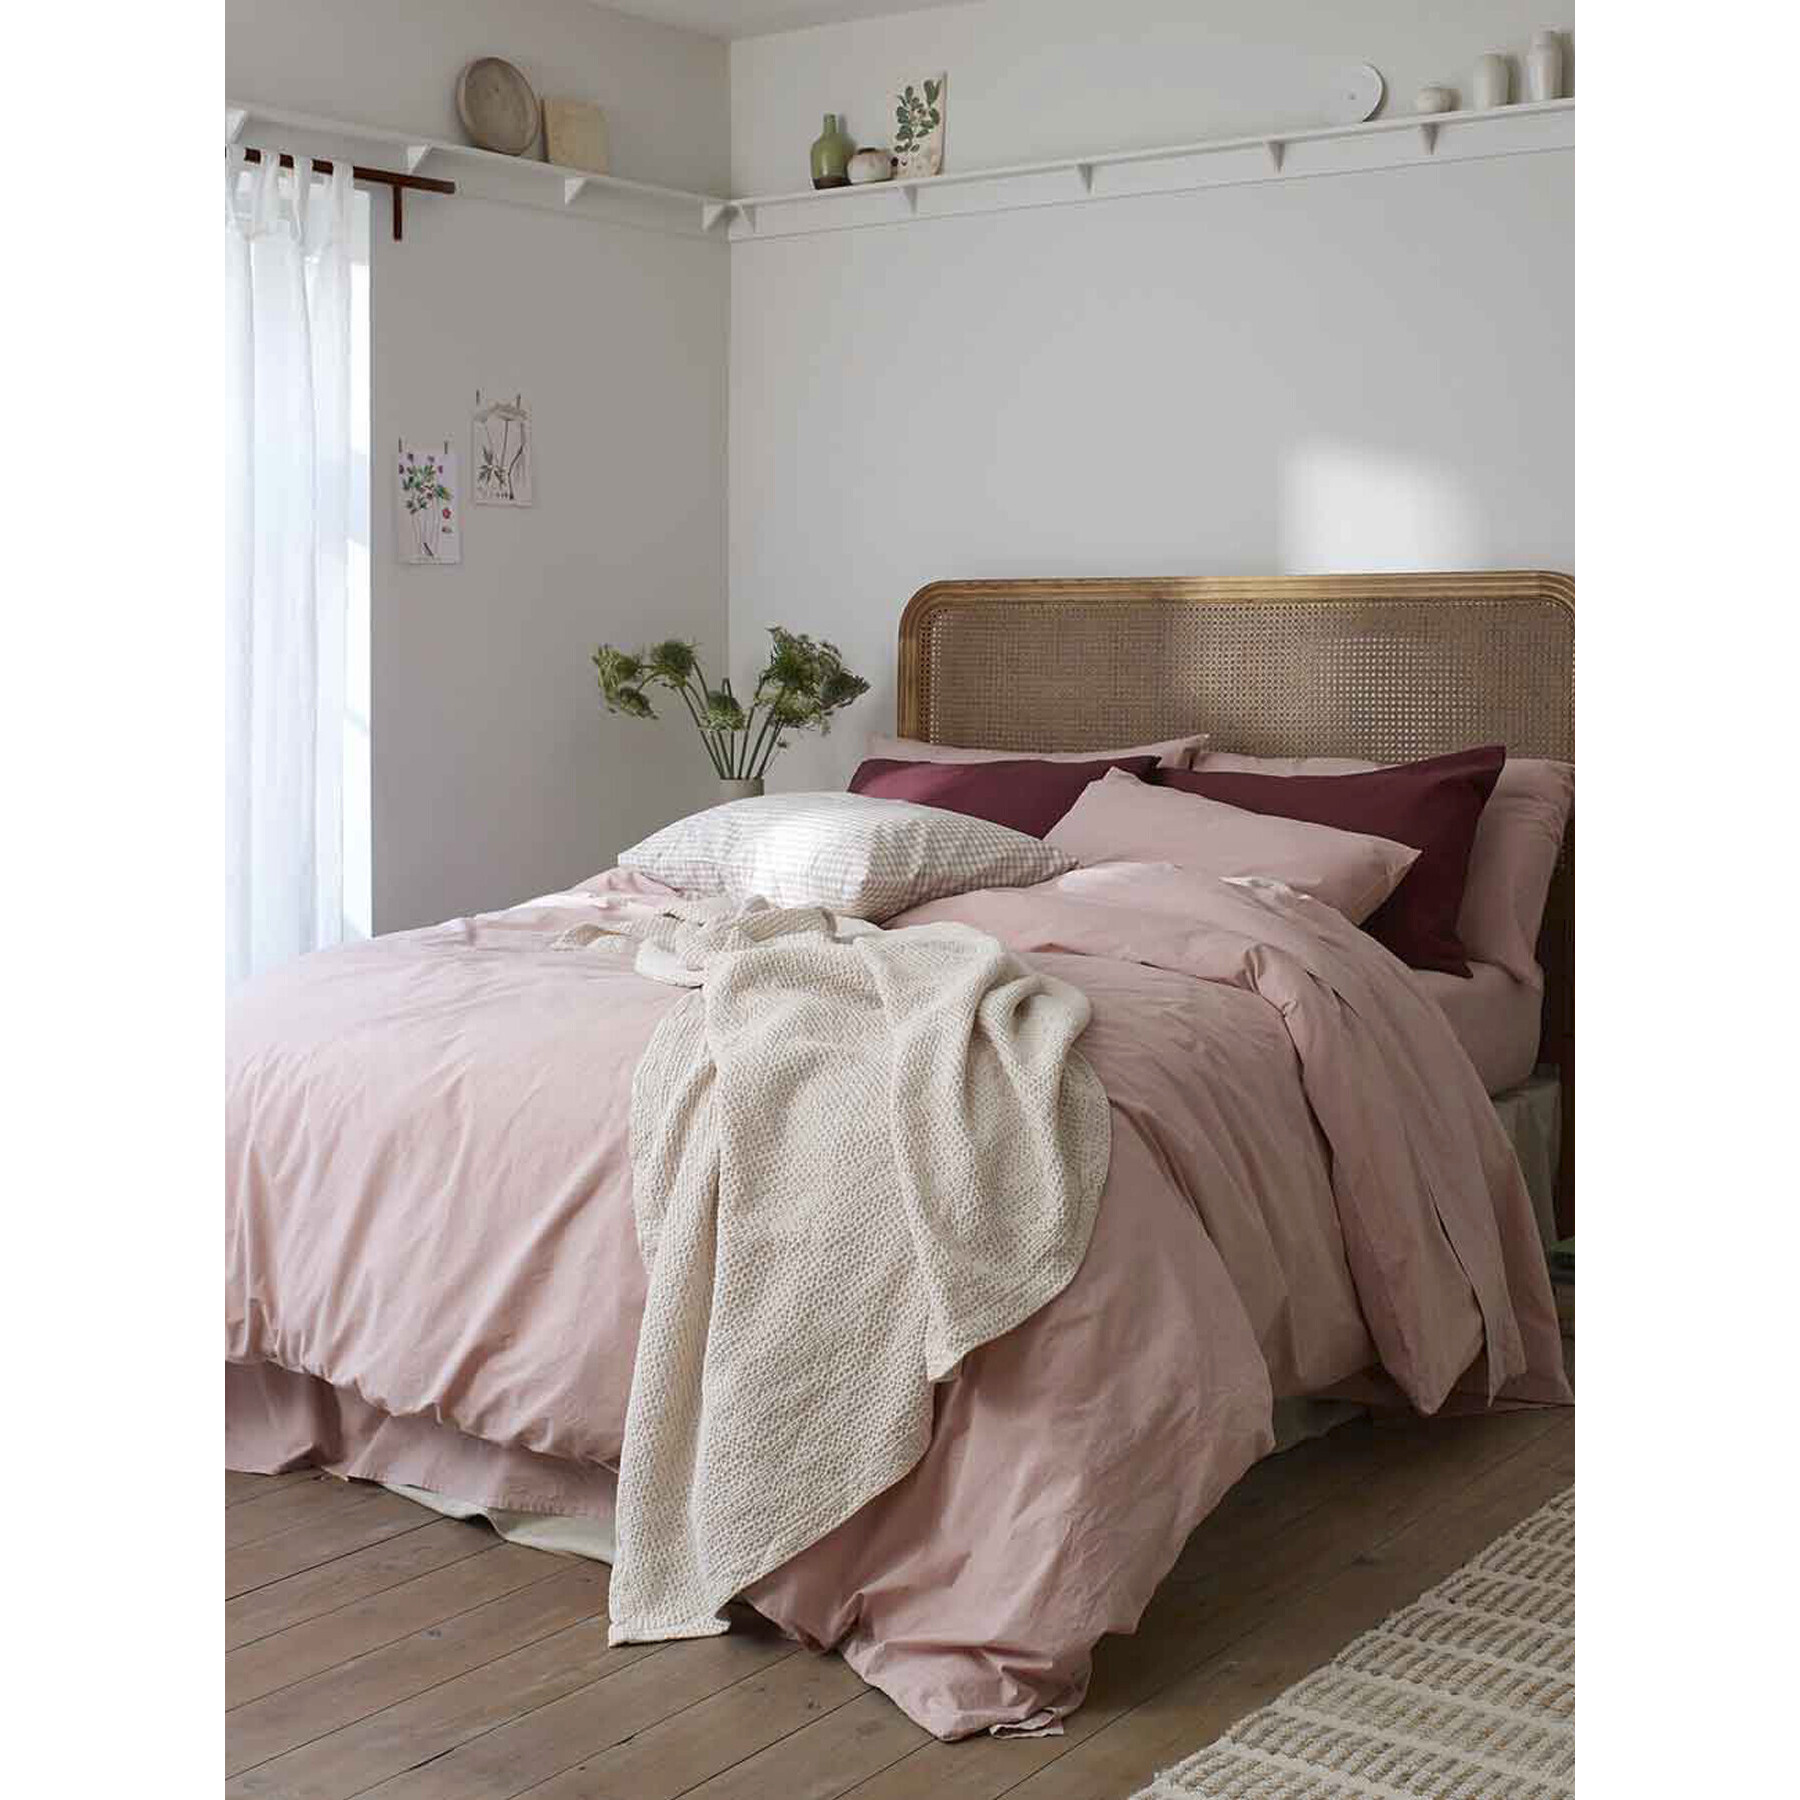 Piglet in Bed Plain Cotton Flat Sheet - Size Double Pink - image 1